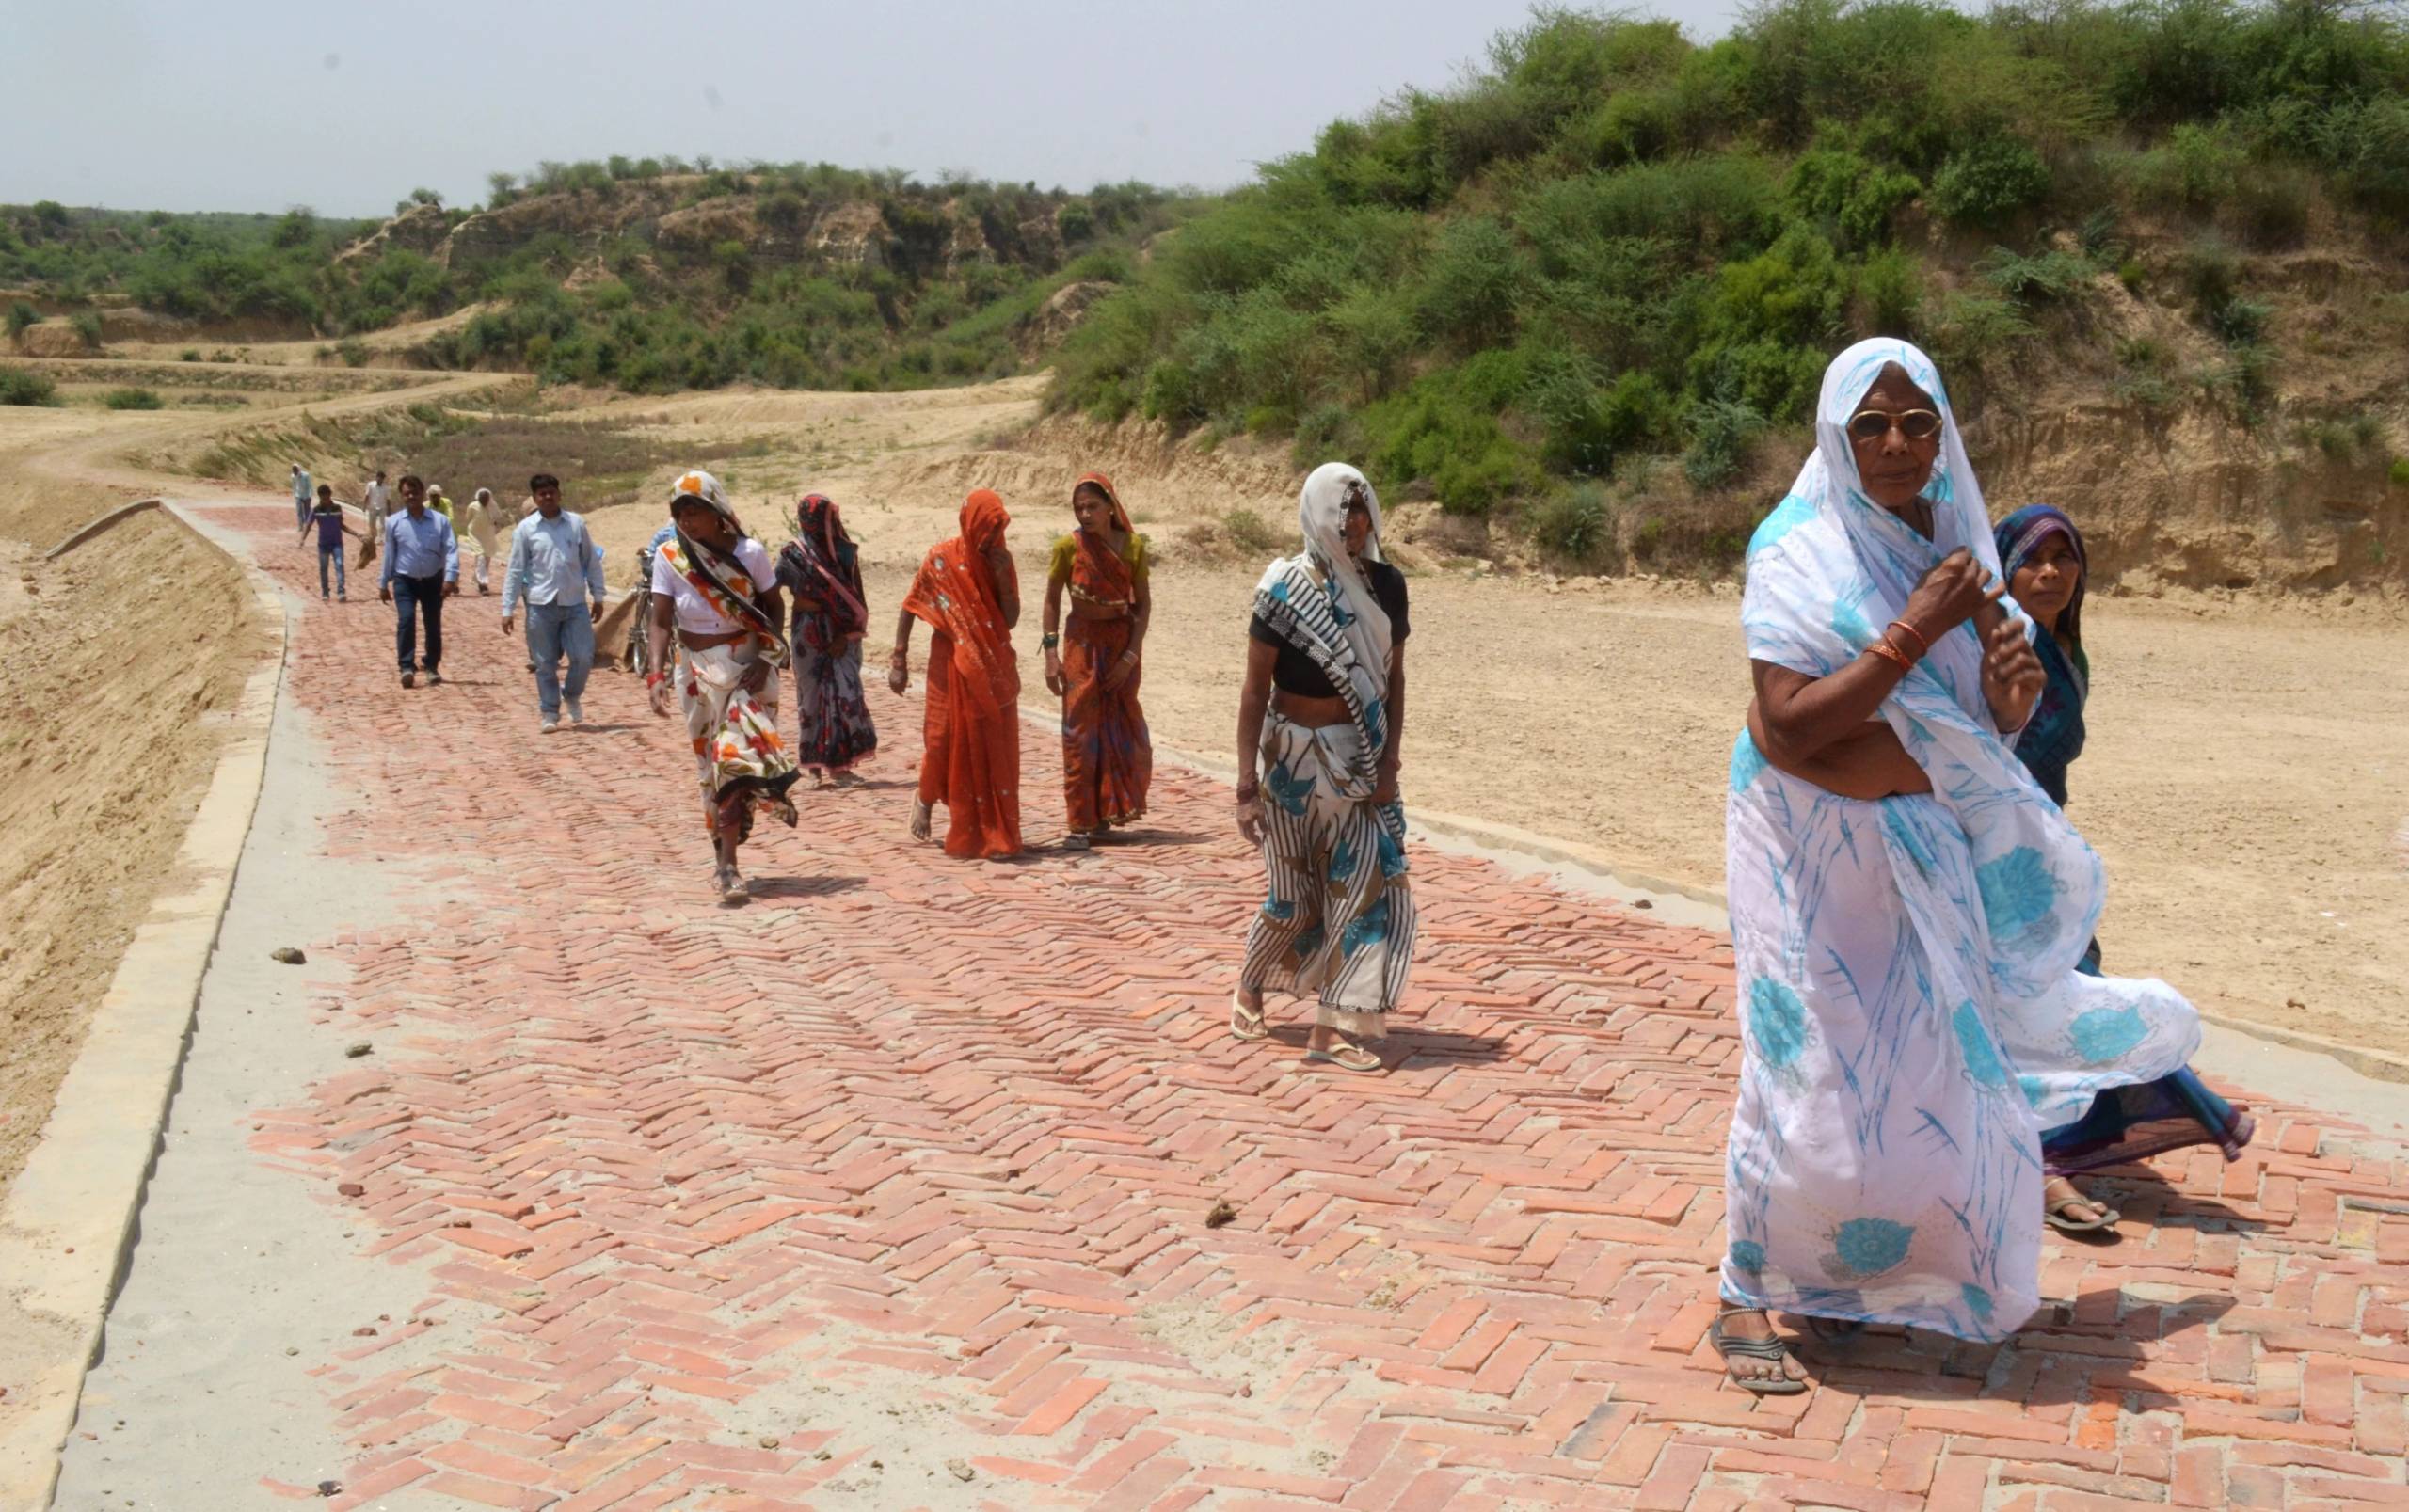 Community members walk through the parched Etawah district of Uttar Pradesh, India. Drought conditions, prevail in these regions, exacerbated by climate change